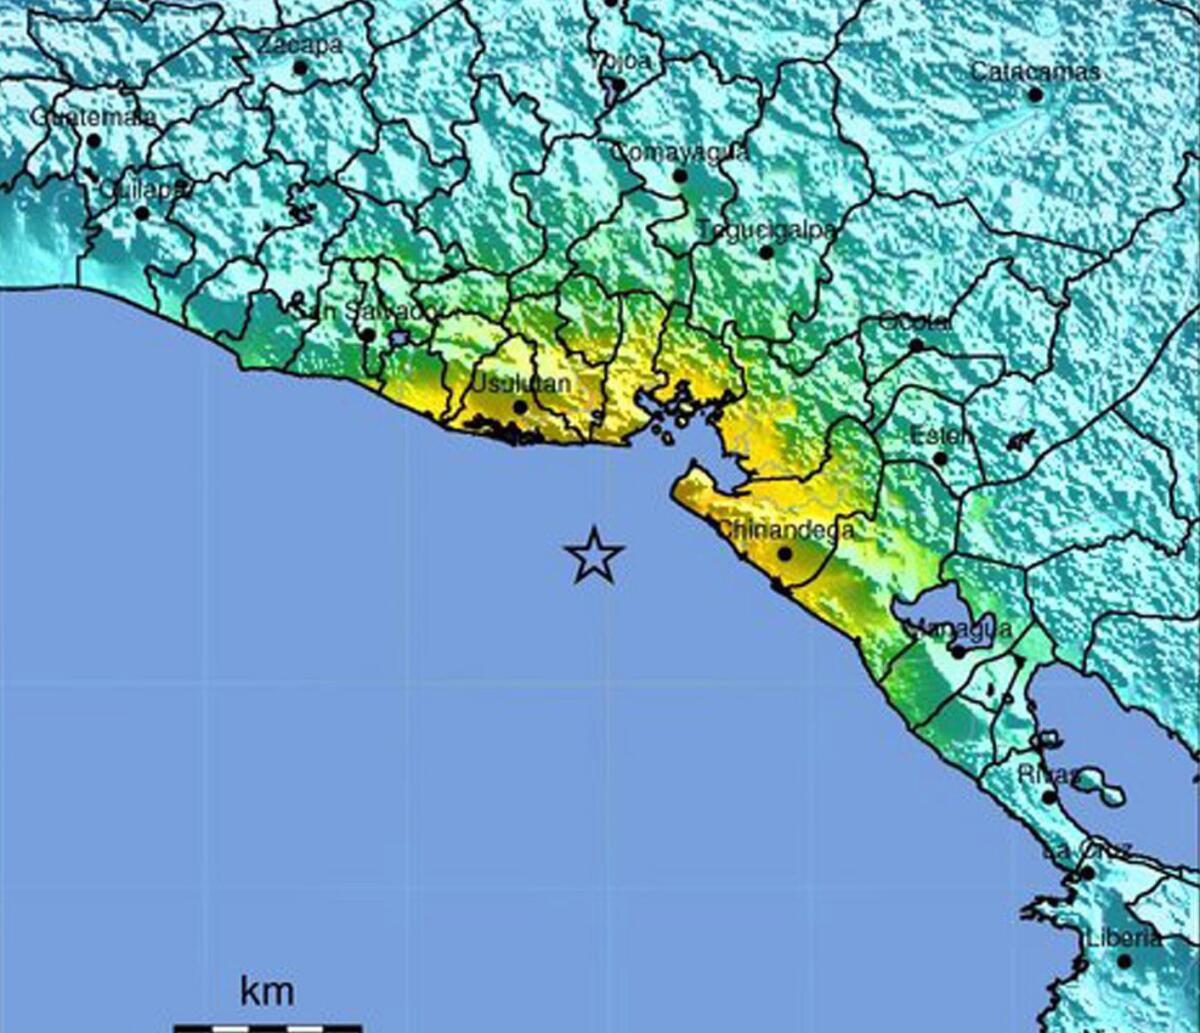 A map released by the U.S. Geological Survey shows the area off the coast of El Salvador where a magnitude 7.4 magnitude struck on Oct. 14.